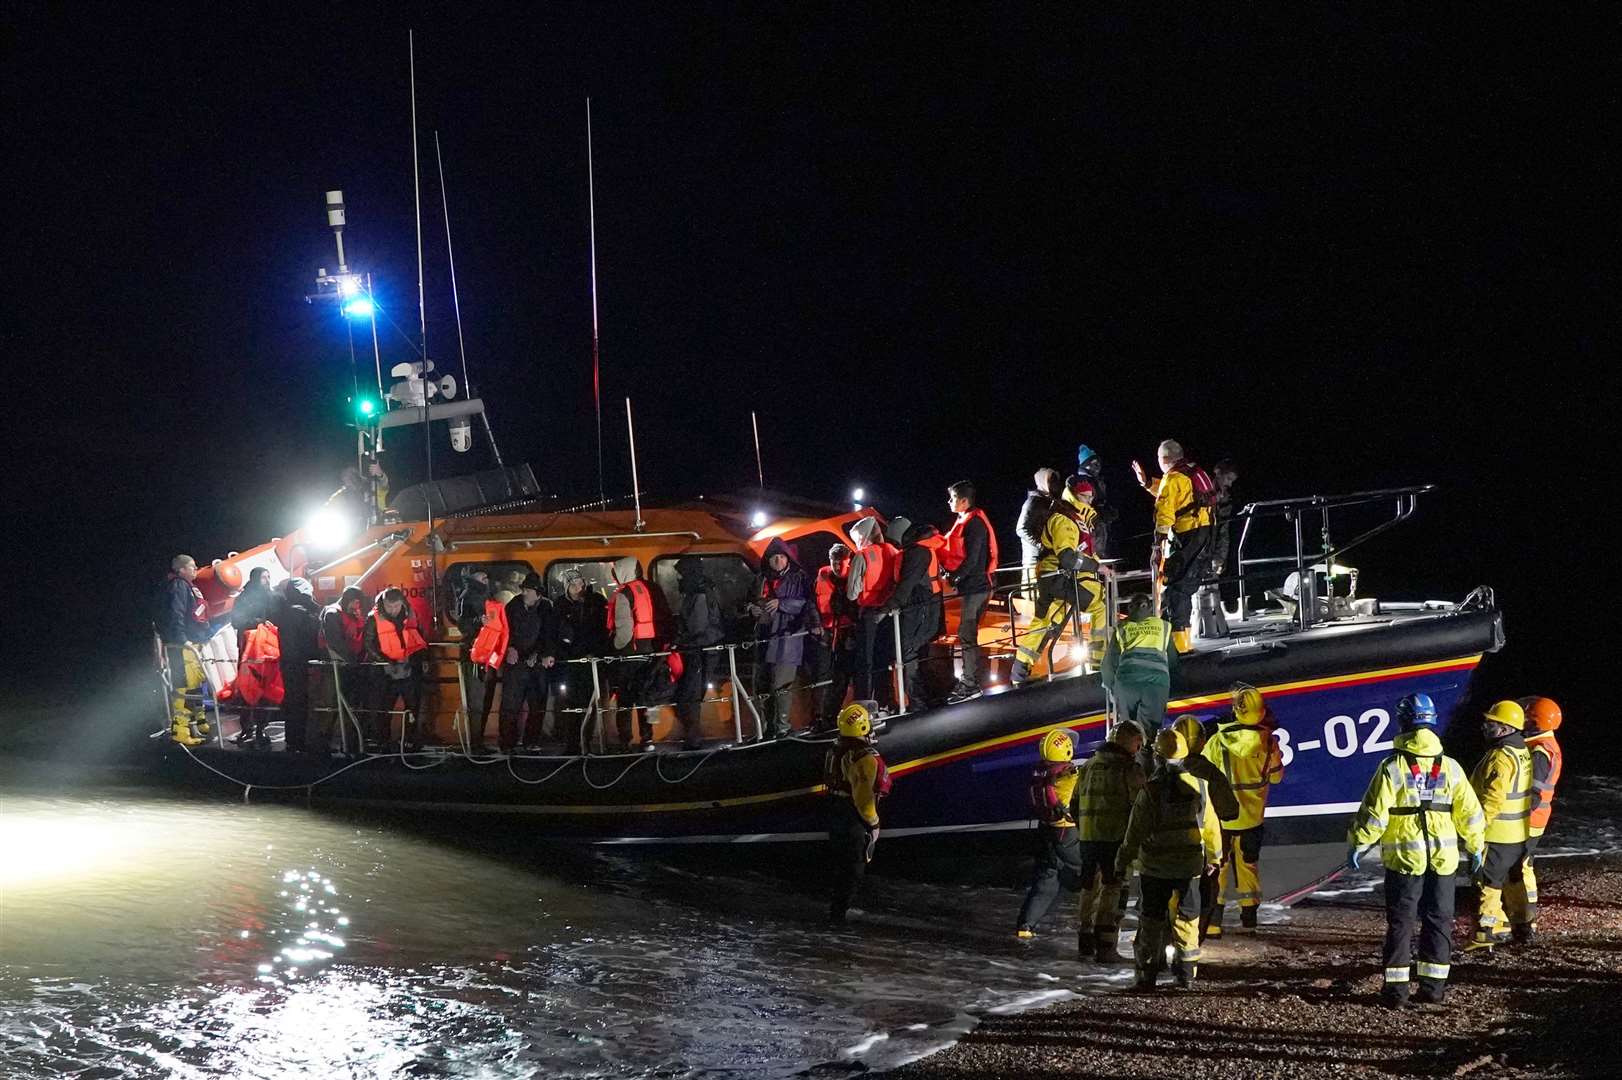 A group of people being helped by RNLI lifeboat following a small boat incident in the Channel. (Gareth Fuller/PA)